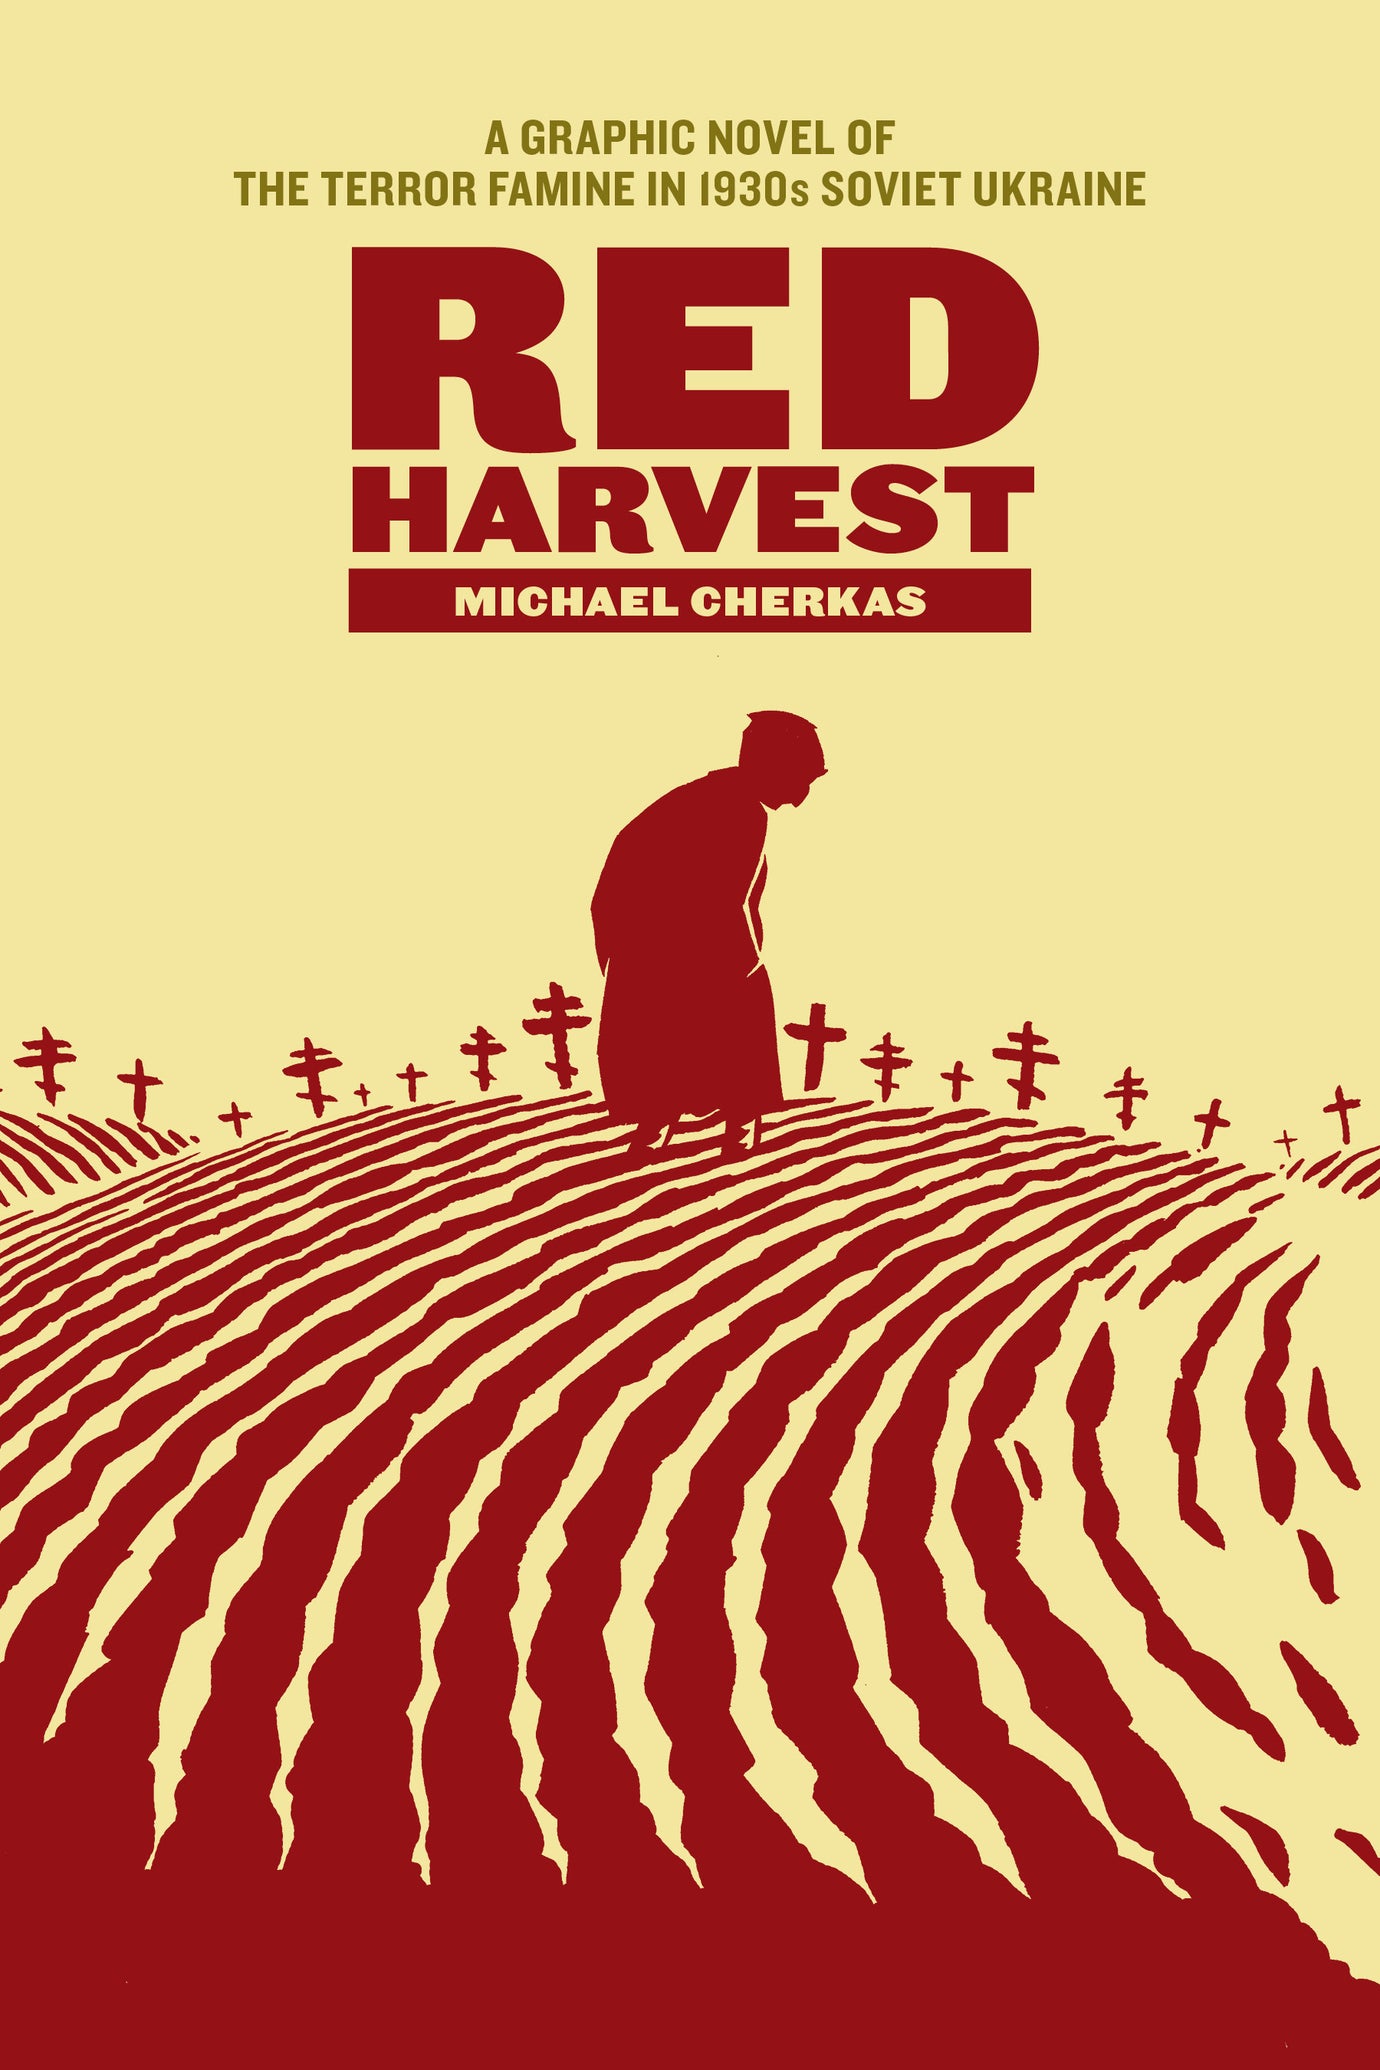 Intro to RED HARVEST by Michael Cherkas